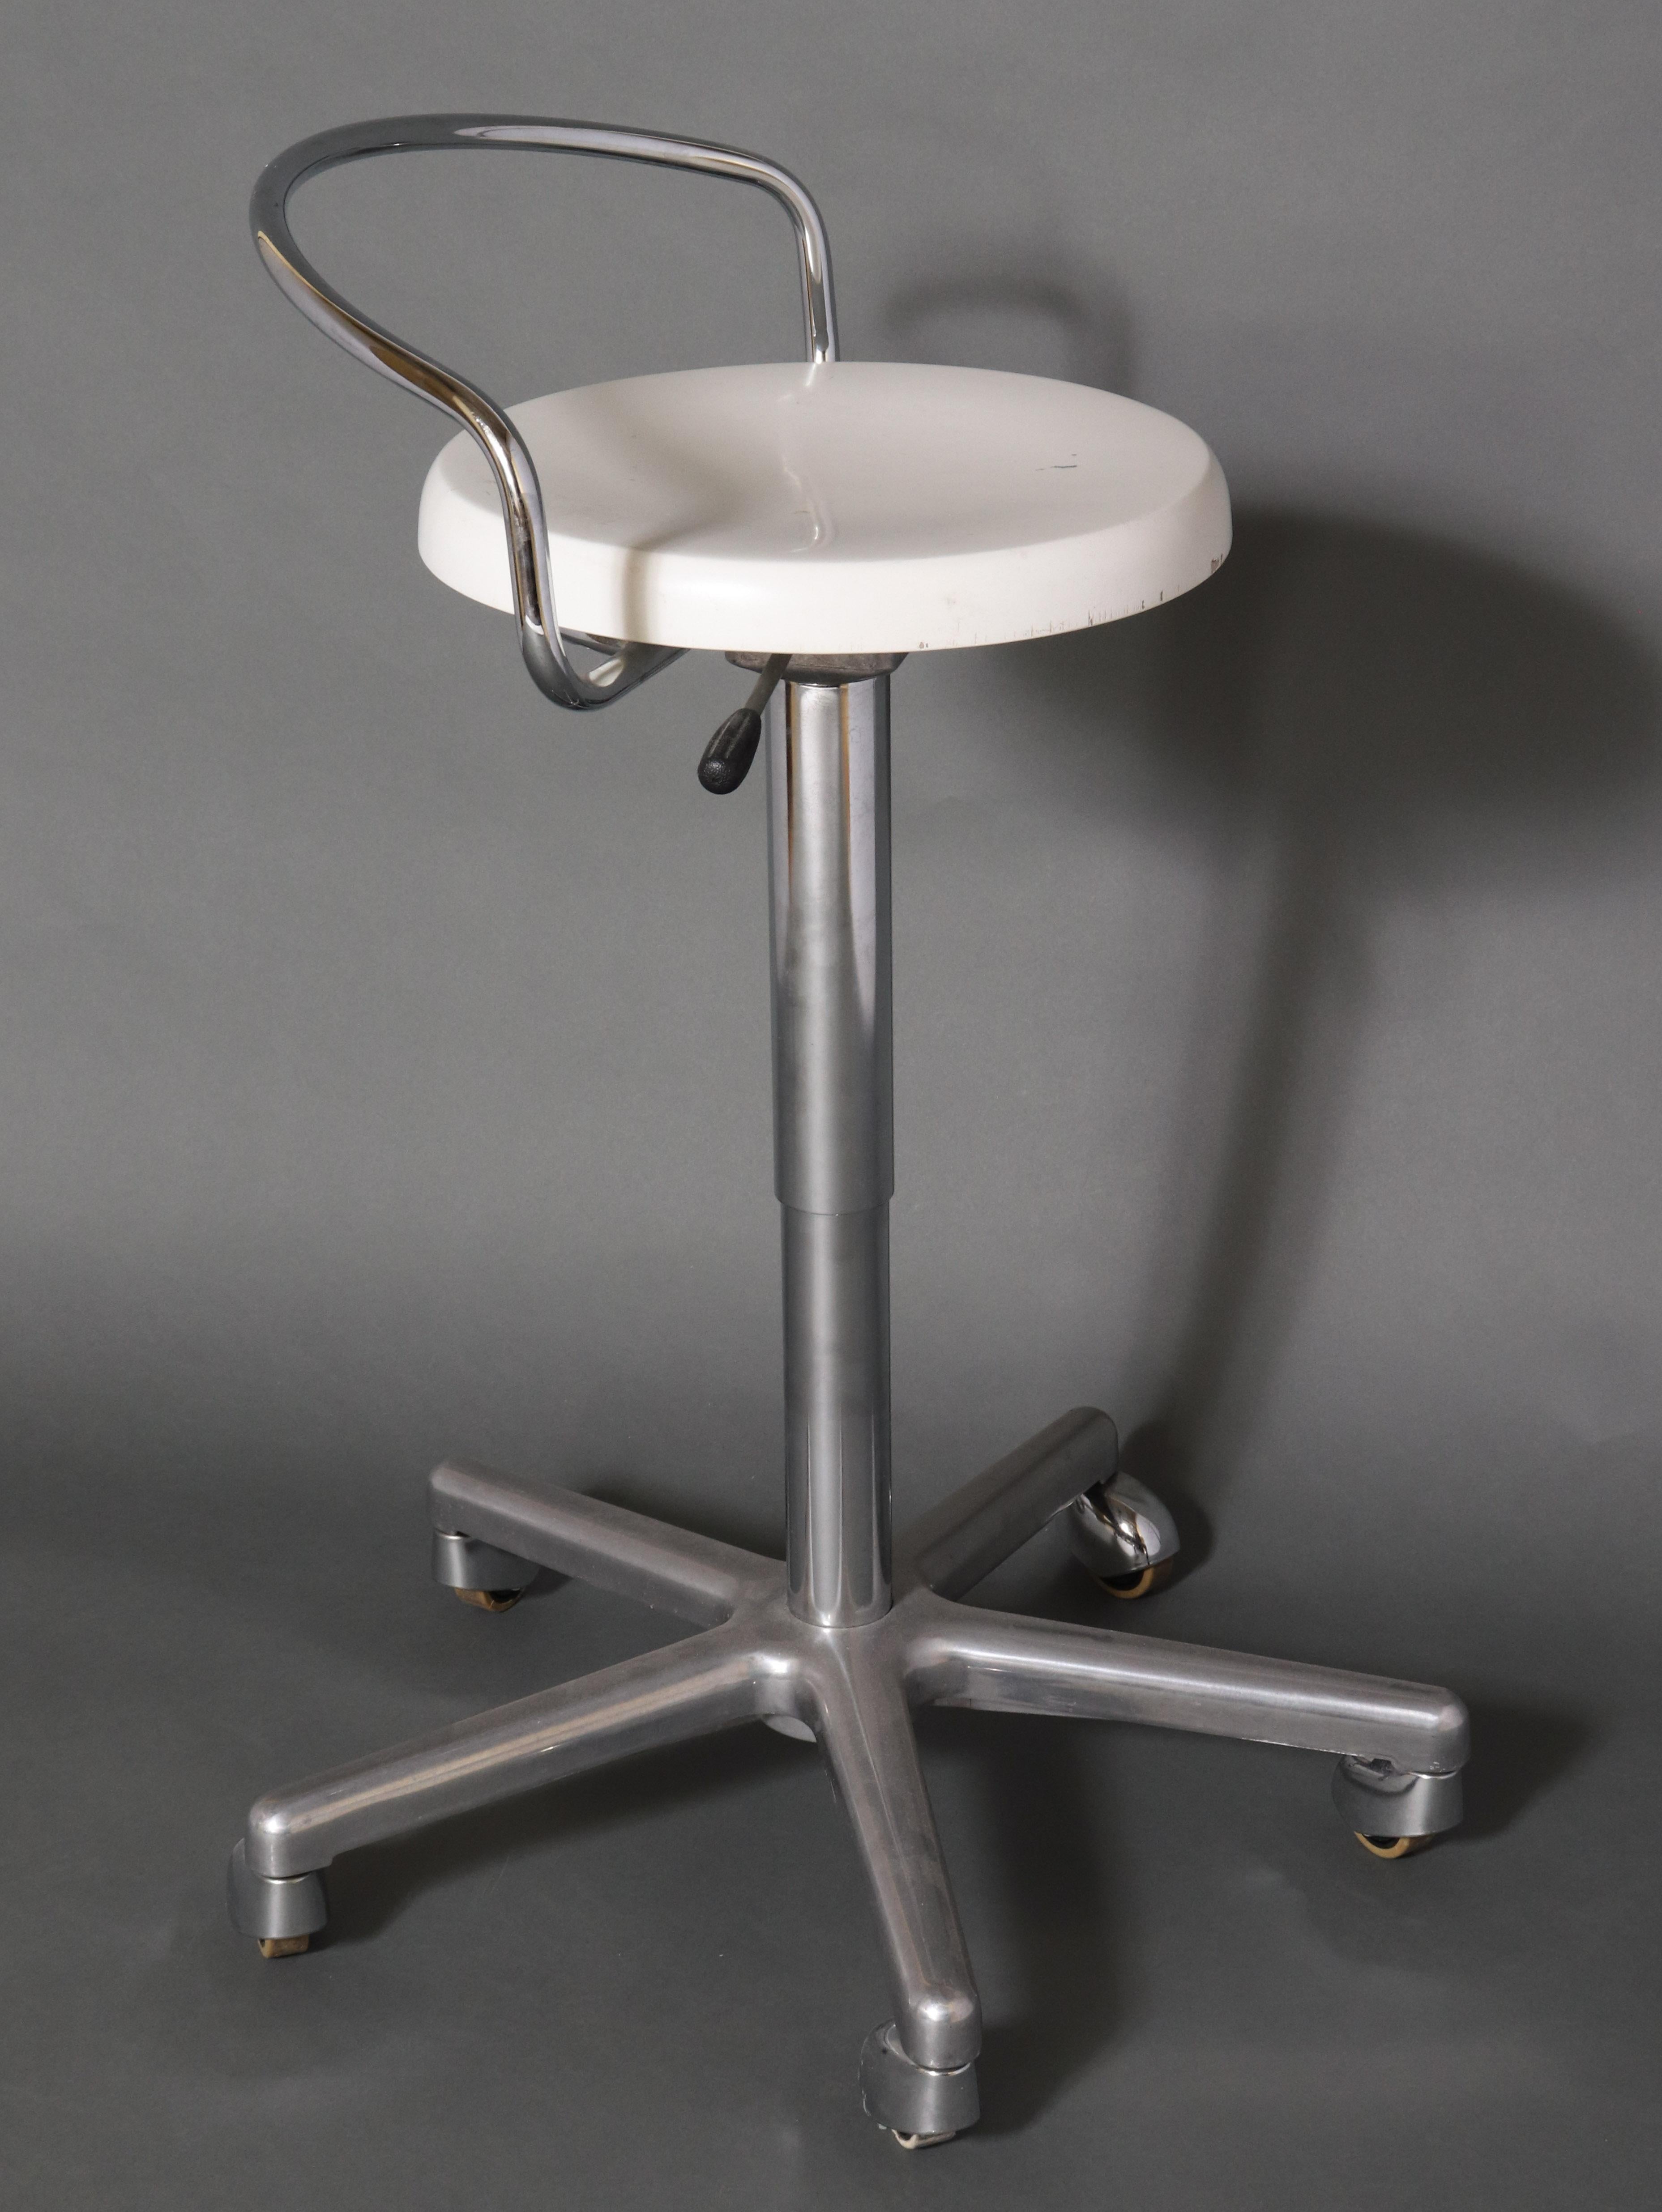 Modern metal swivel stool with adjustable height. The piece is on casters and has a low metal back bar with a white seat made of composite material. In great vintage condition with some age-appropriate wear and use.